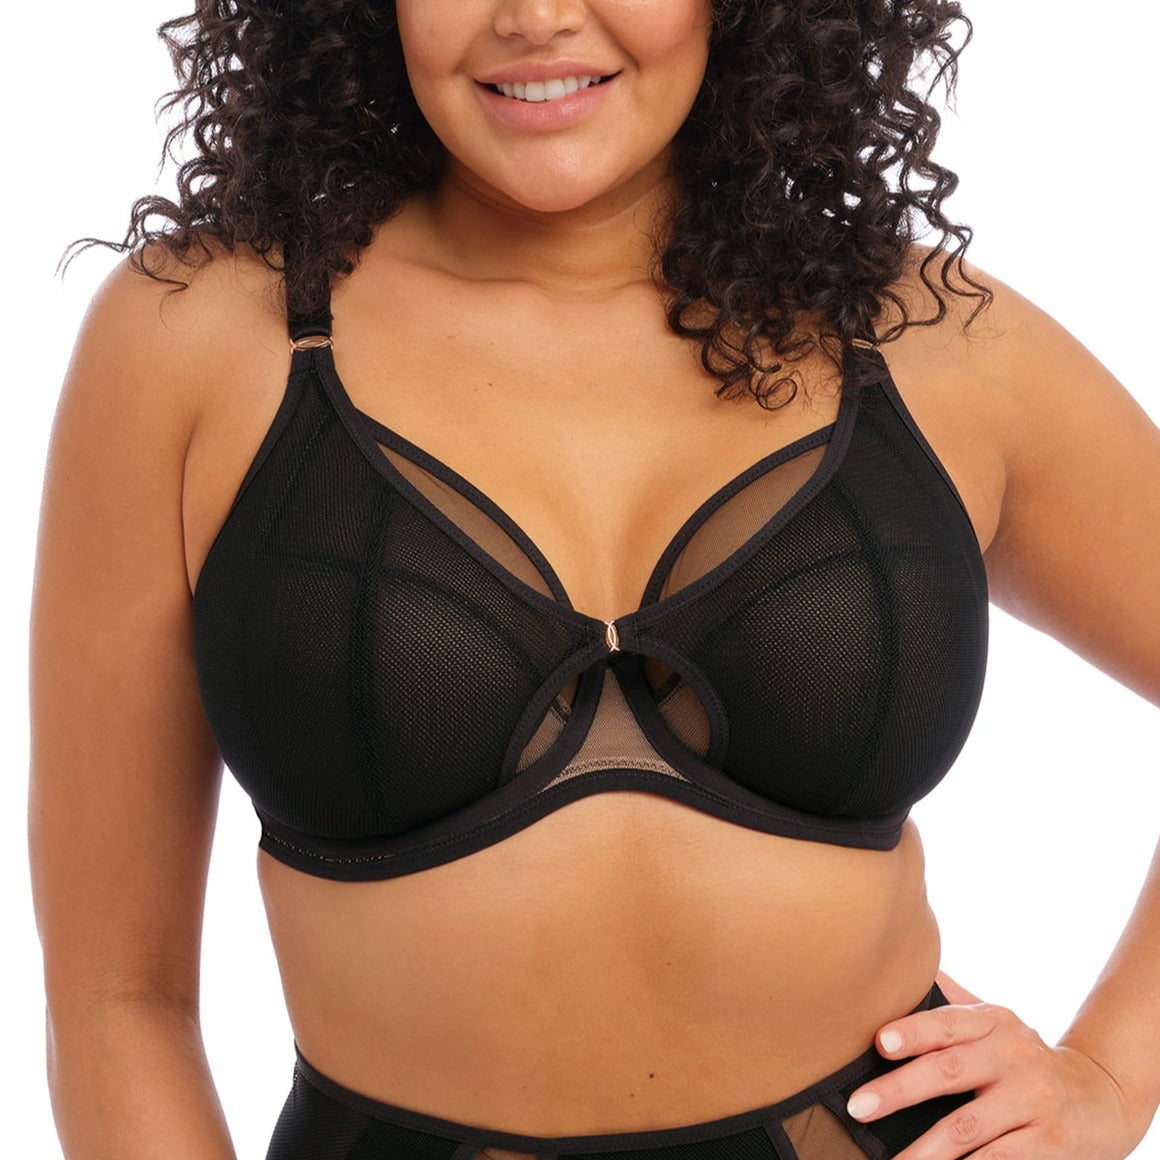 Montelle Parisian Kiss High Waist Brief in Black/Taupe FINAL SALE (40% Off)  - Busted Bra Shop